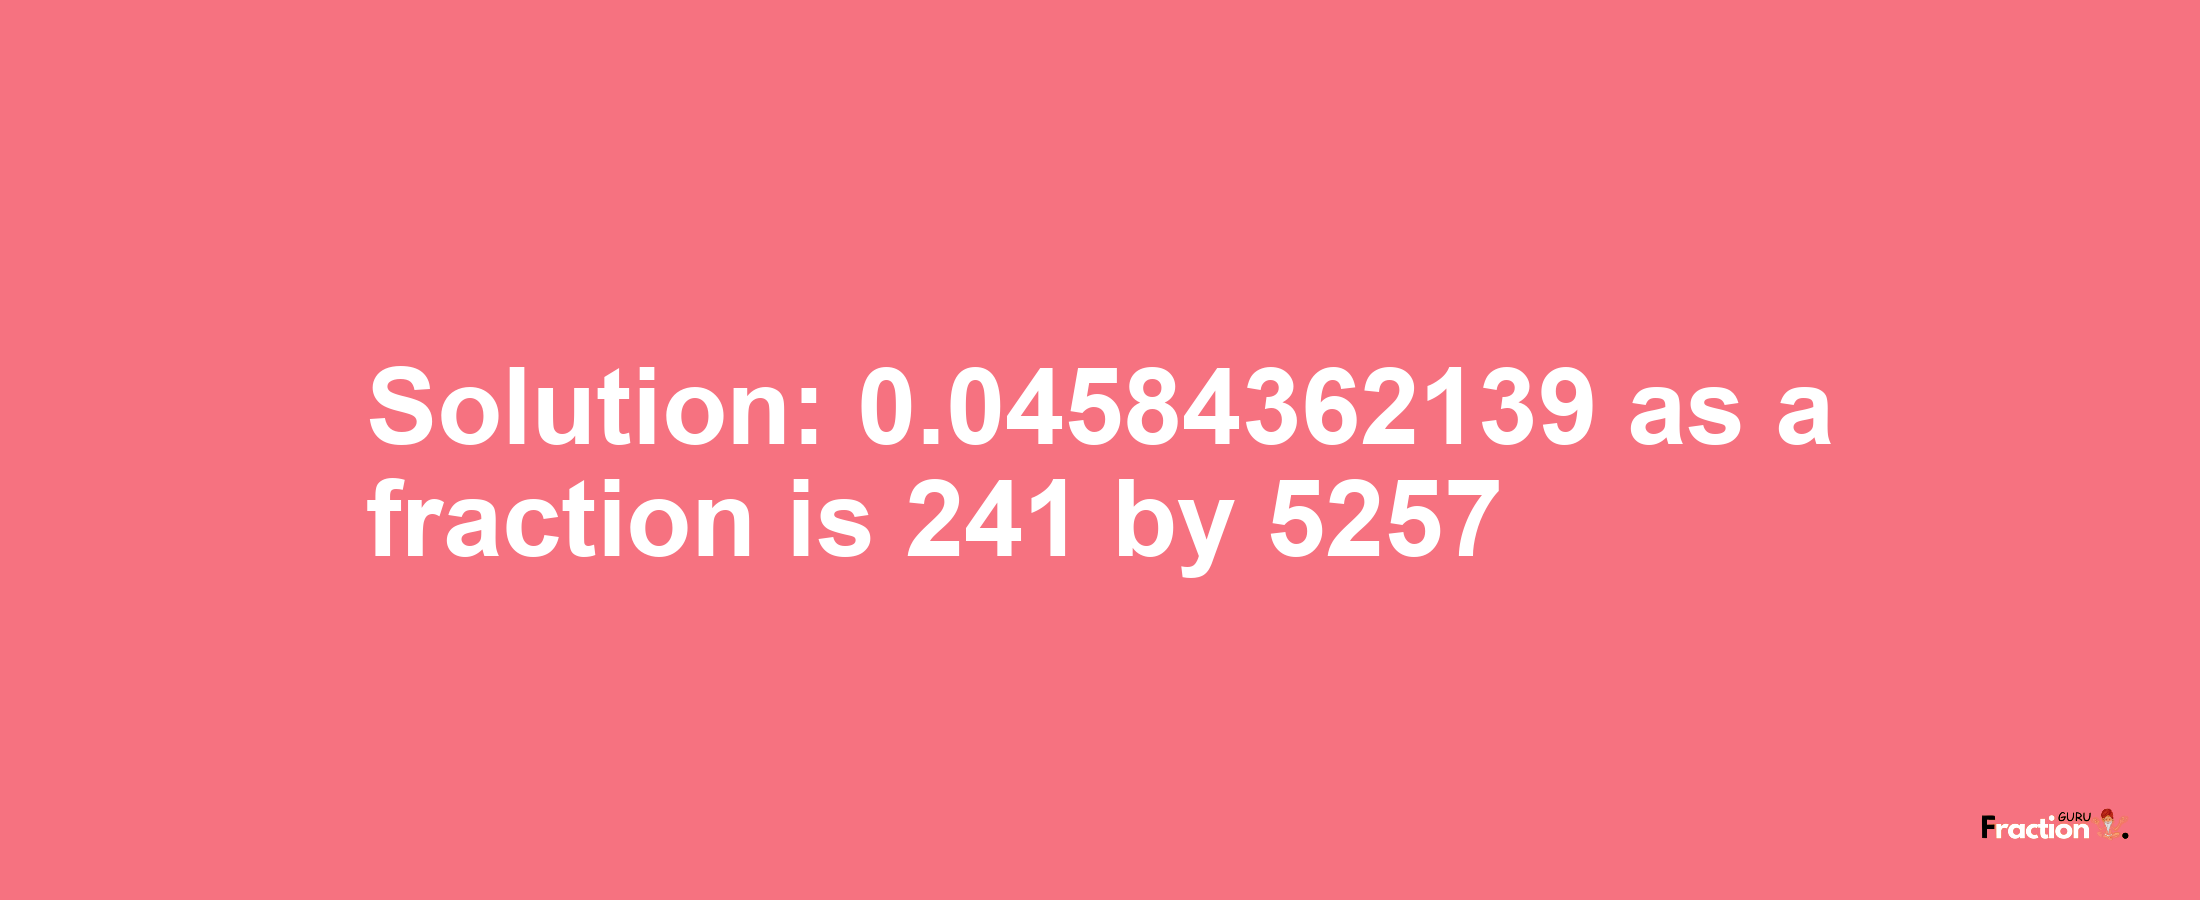 Solution:0.04584362139 as a fraction is 241/5257